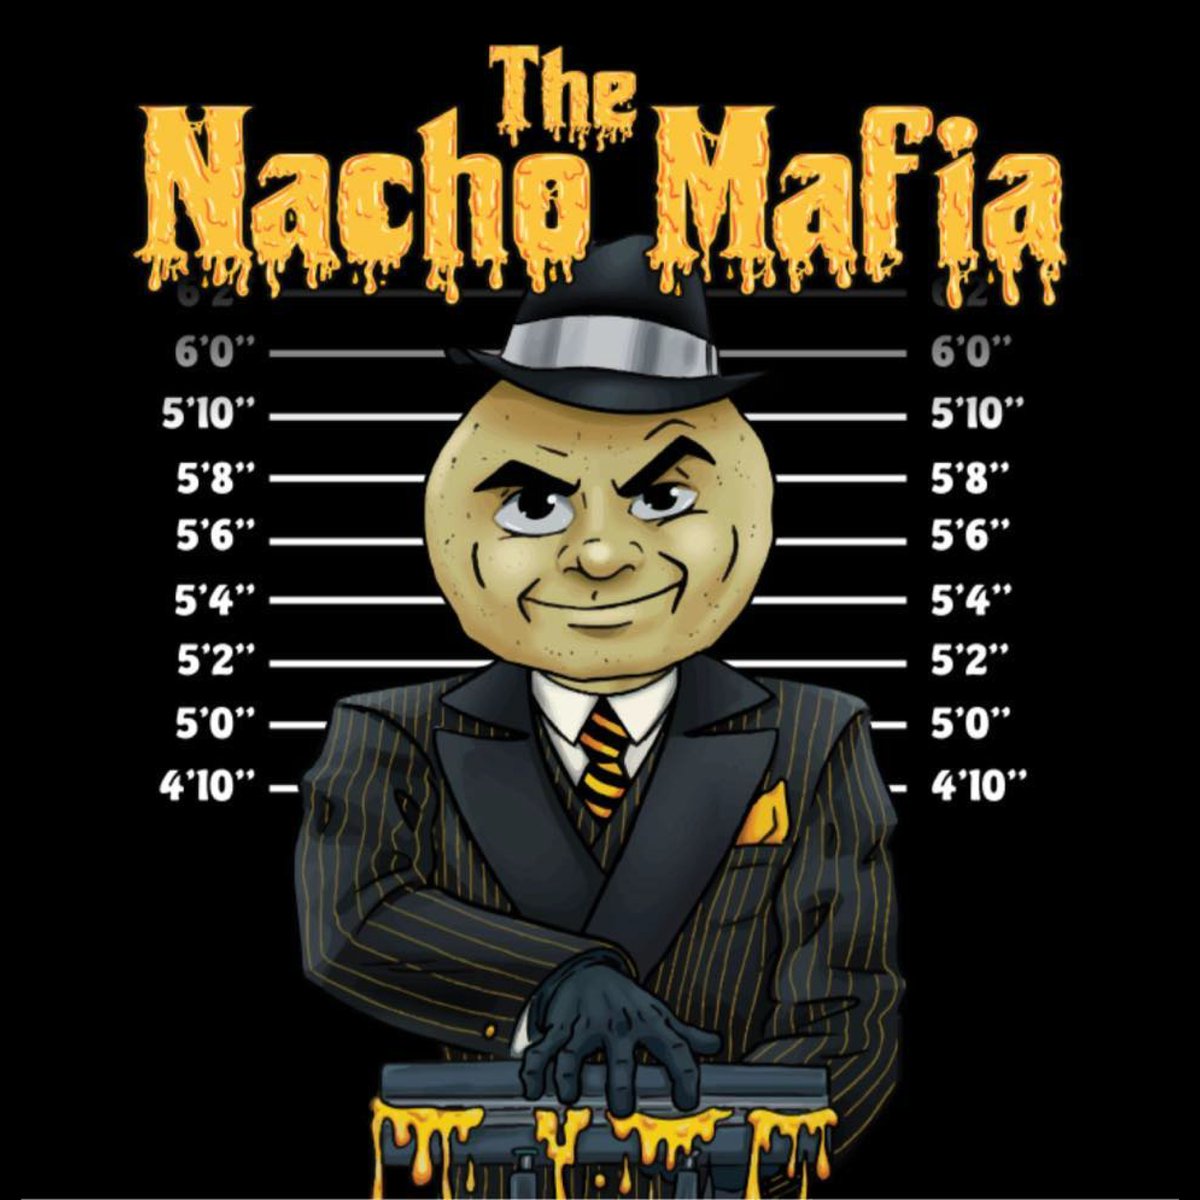 #WelcomeWednesday
Welcome, and a great big THANK YOU to our newest Chamber member The Nacho Mafia! Follow them on Facebook to view their schedule and upcoming events: bit.ly/44qItag